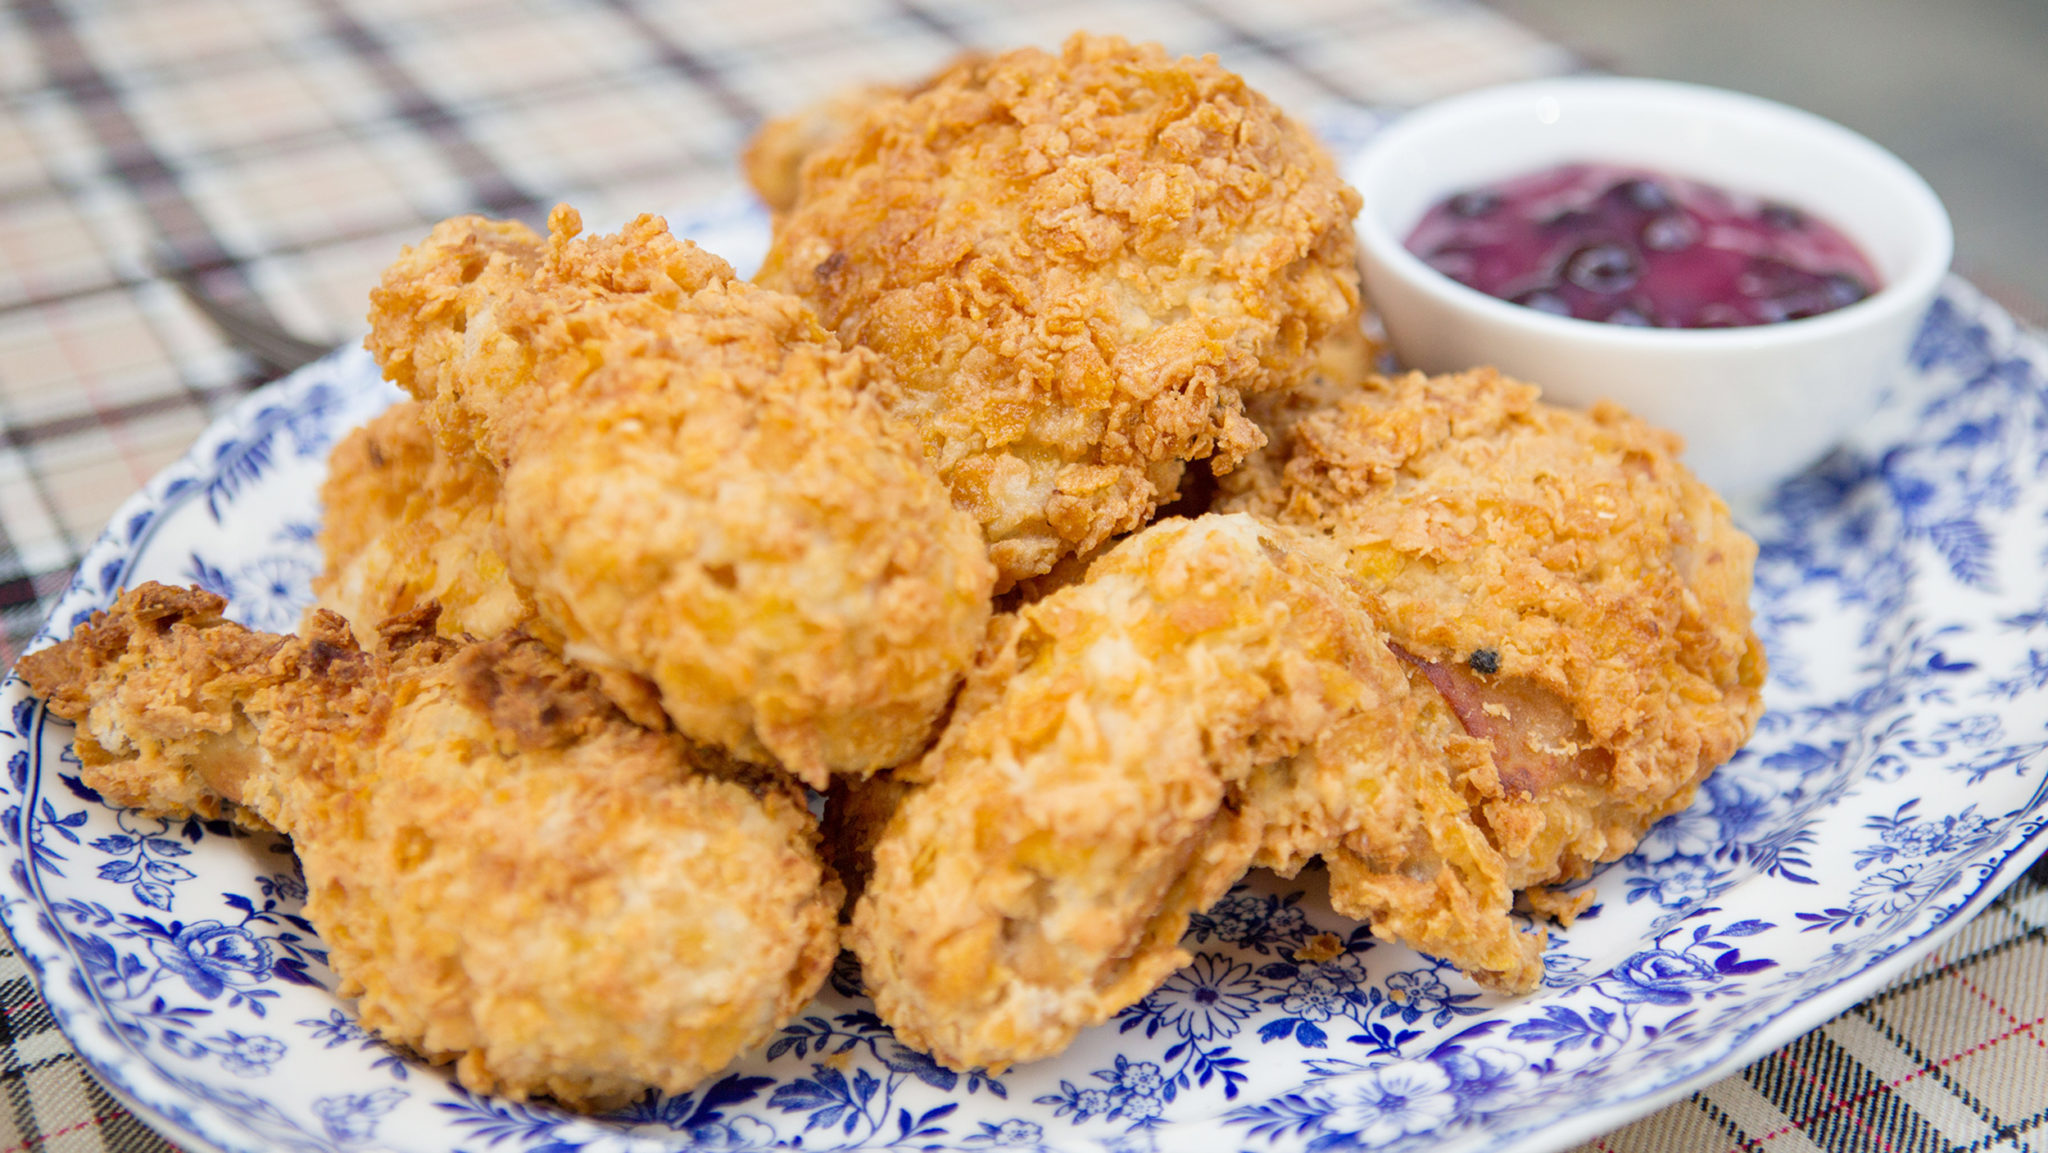 Eating tons of fried chicken is linked with higher risk of d***h